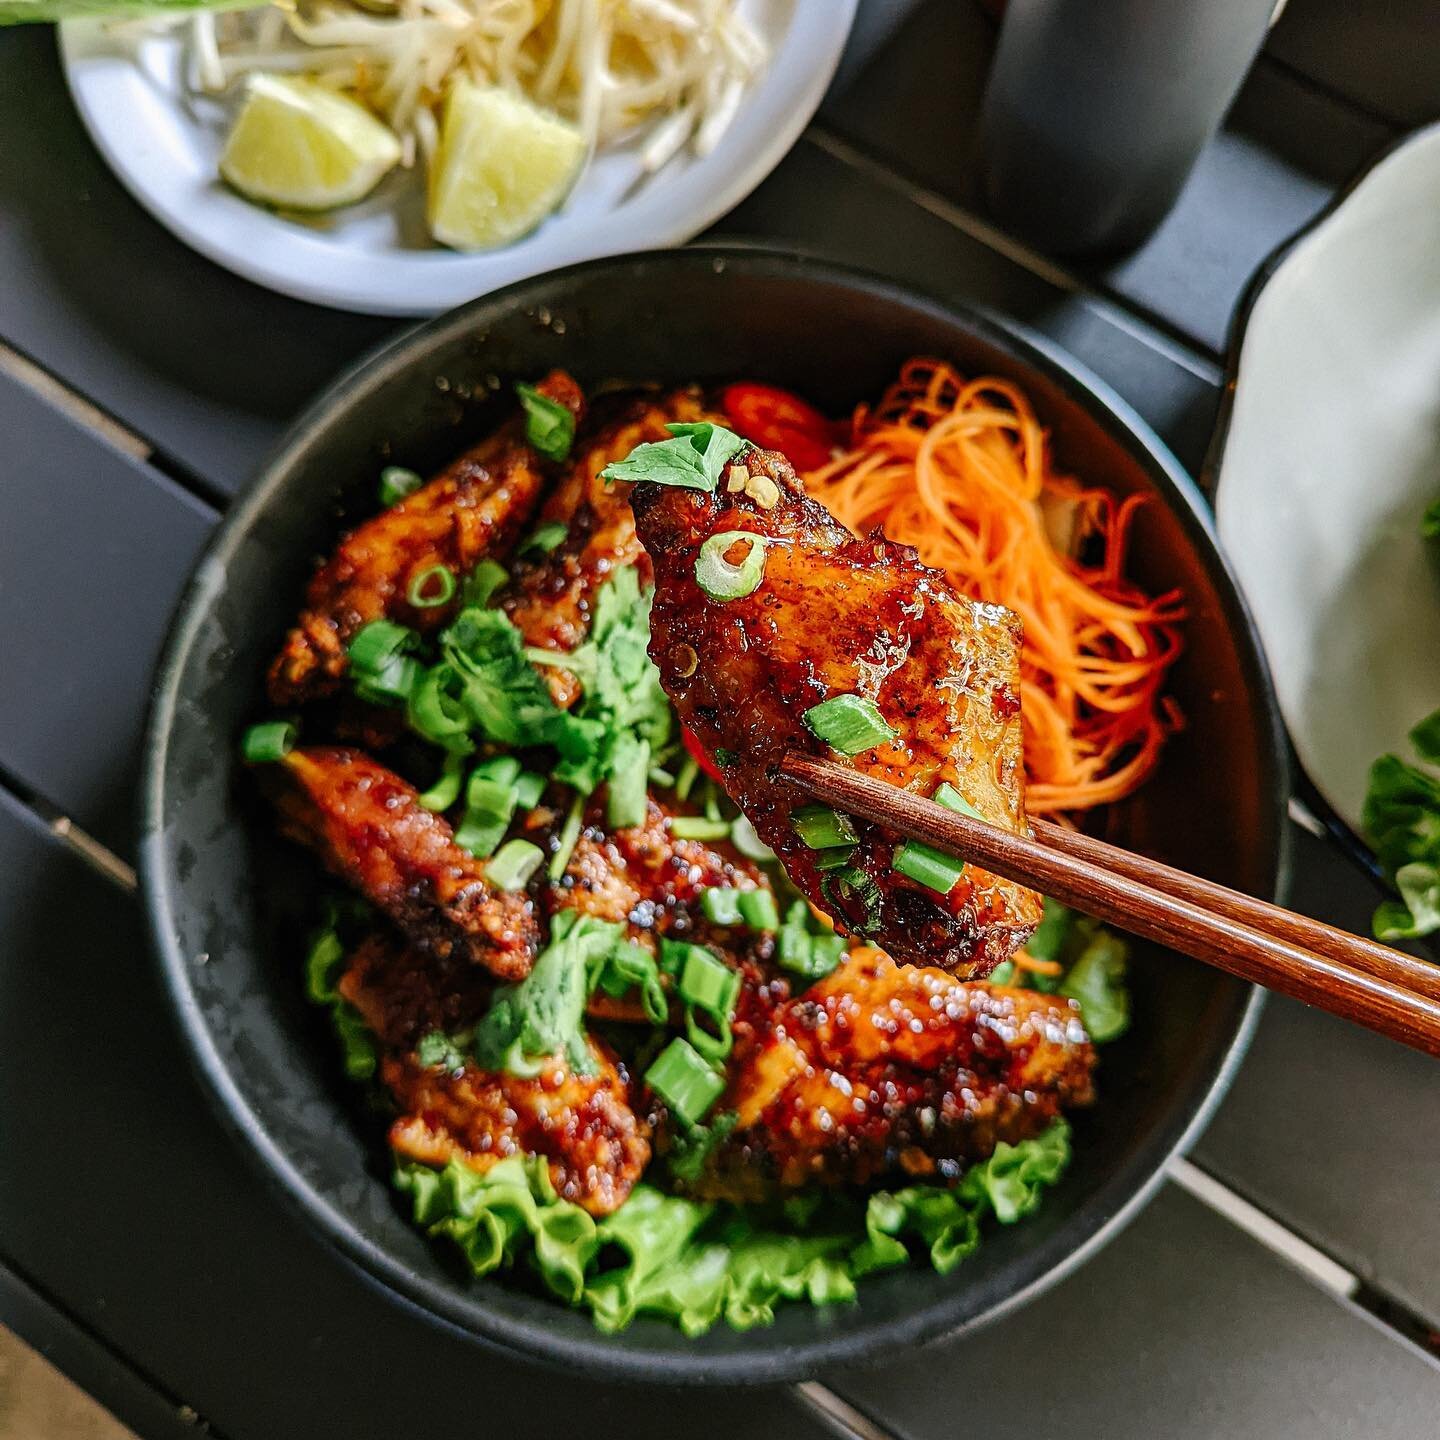 Spring is finally springing, and our wings, they do be winging. 🌸🍗🌸🍗
. 
.
.
.
.
.
.
.
.
.
#madamevo #eatingnewyork #eatupnyc #buzzfeast #sogood #tryitordiet #hypebeast #forkyeah #bestfoodworld #nomnomnom #nomnom #lovefood #nycfat #myfab5 #instafo